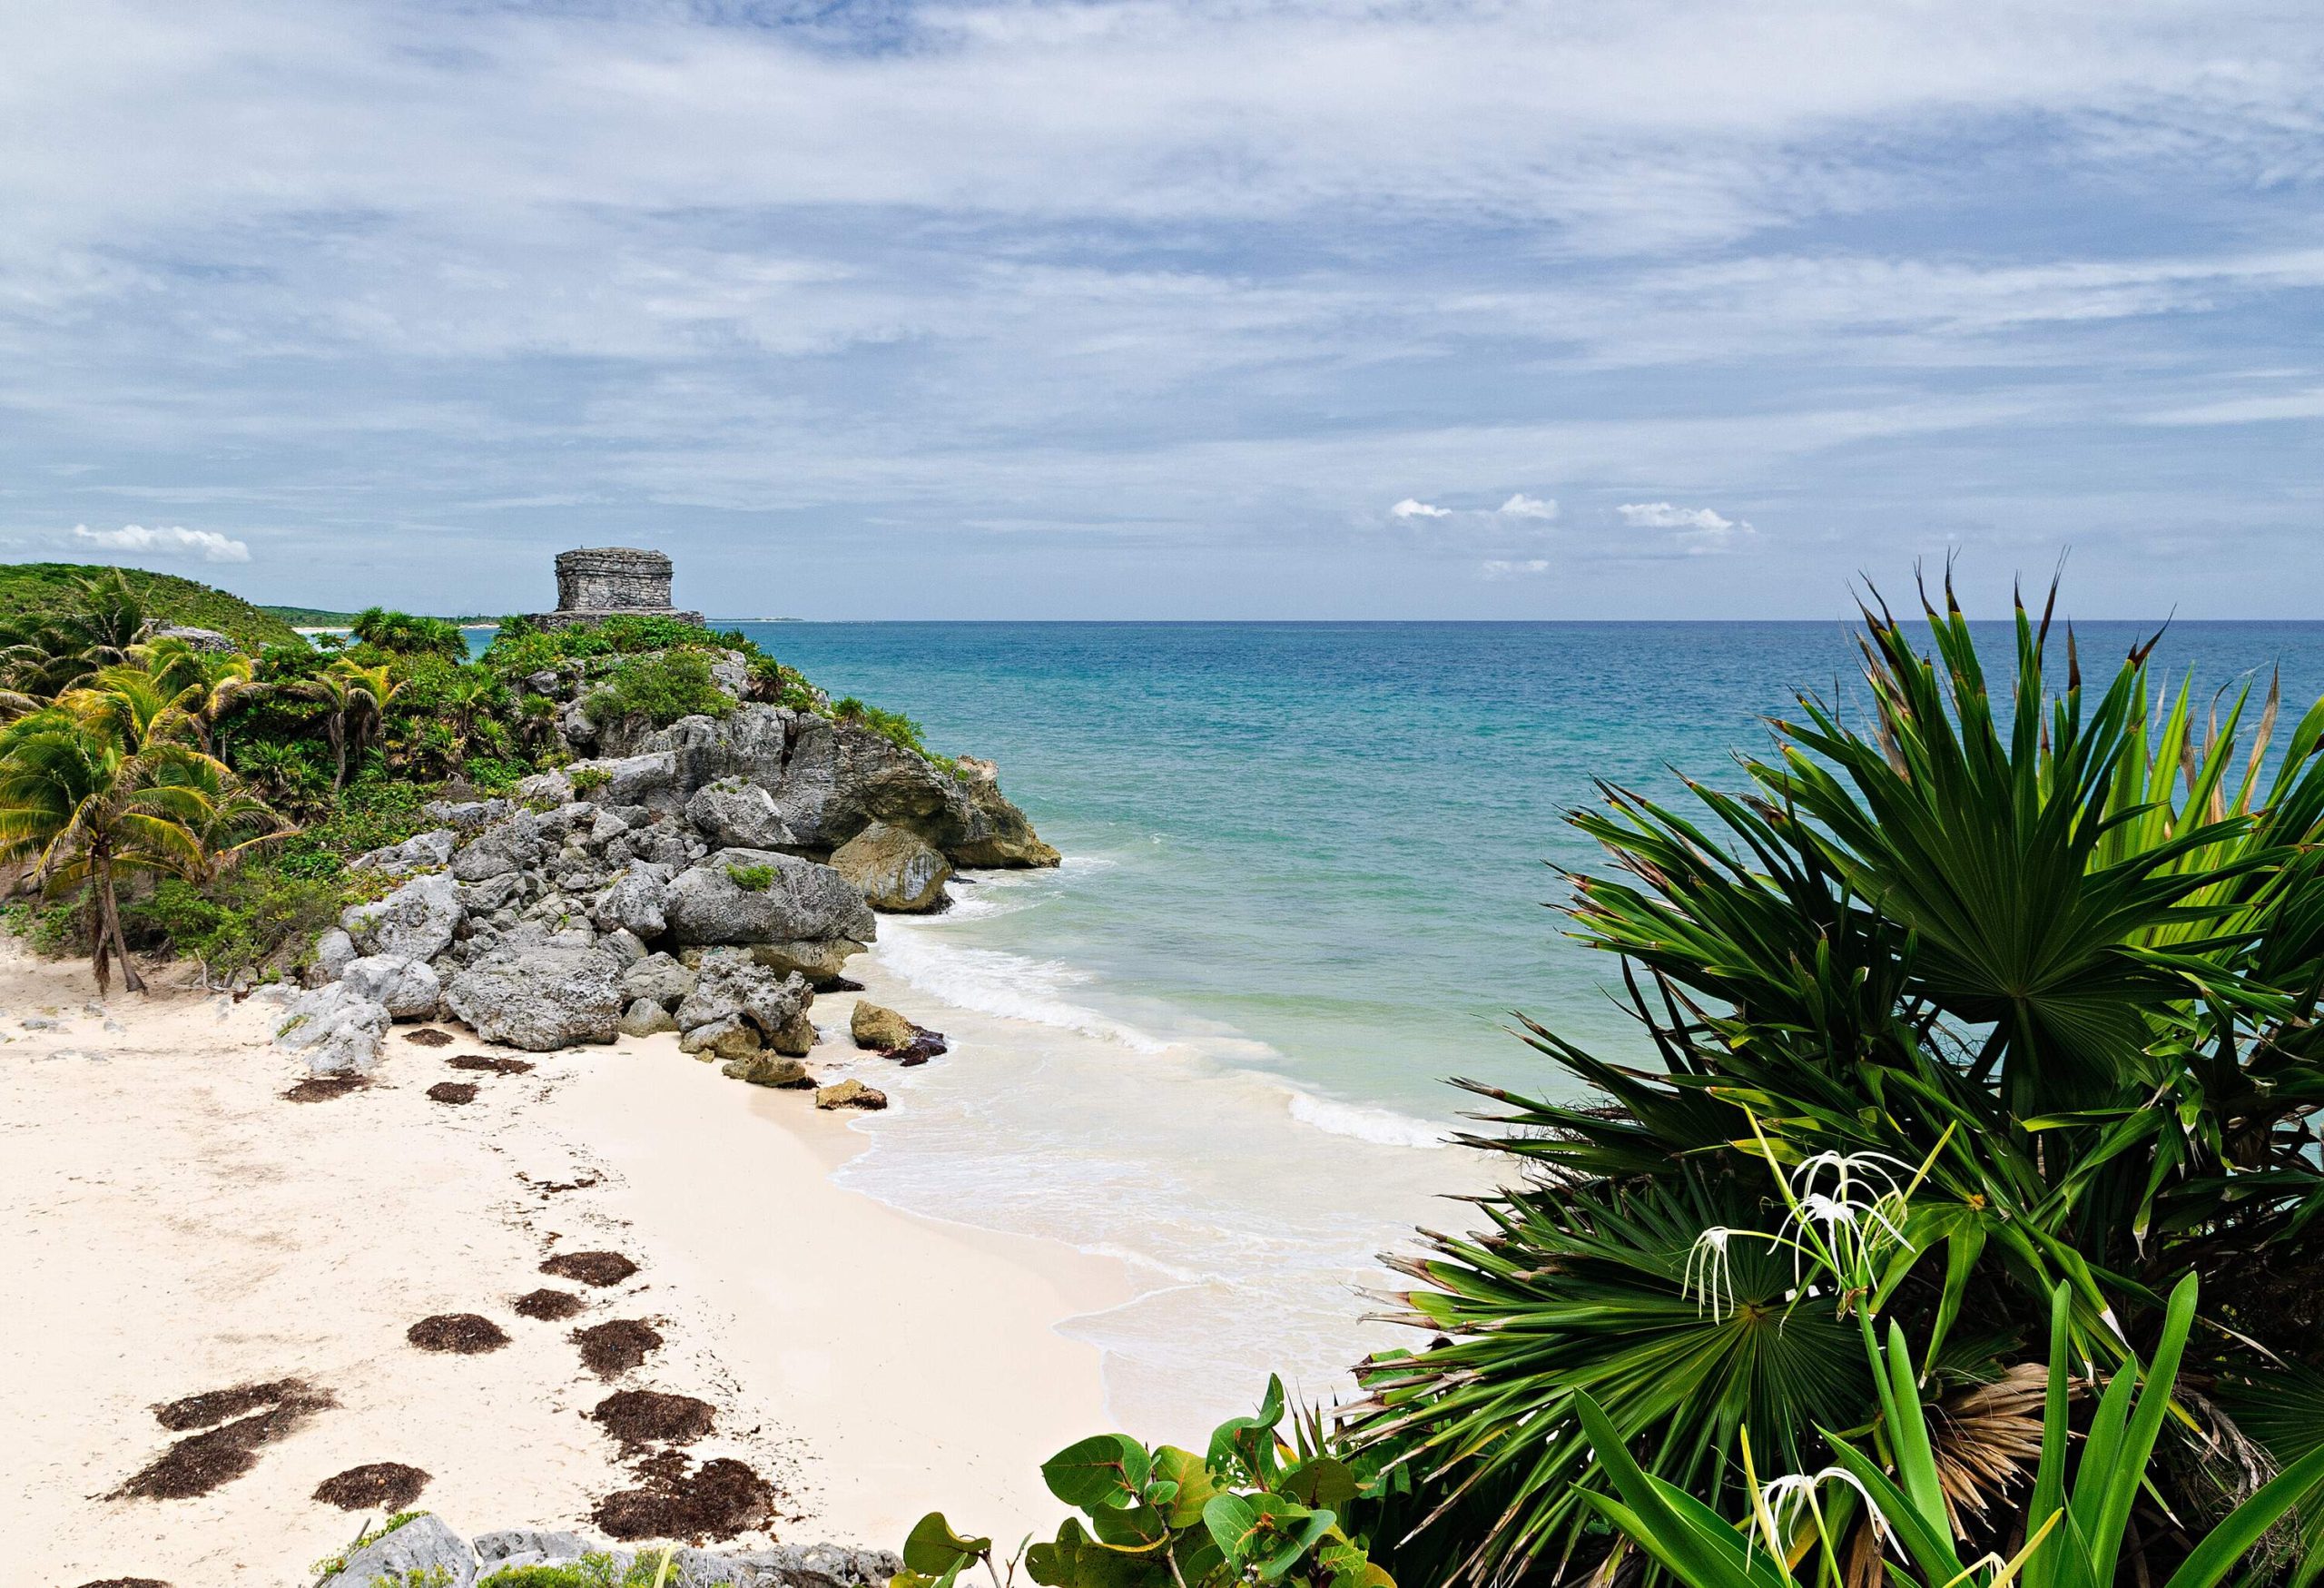 A hidden gem of a small beach with pristine white sand nestled between vibrant tropical plants and rugged rocks.